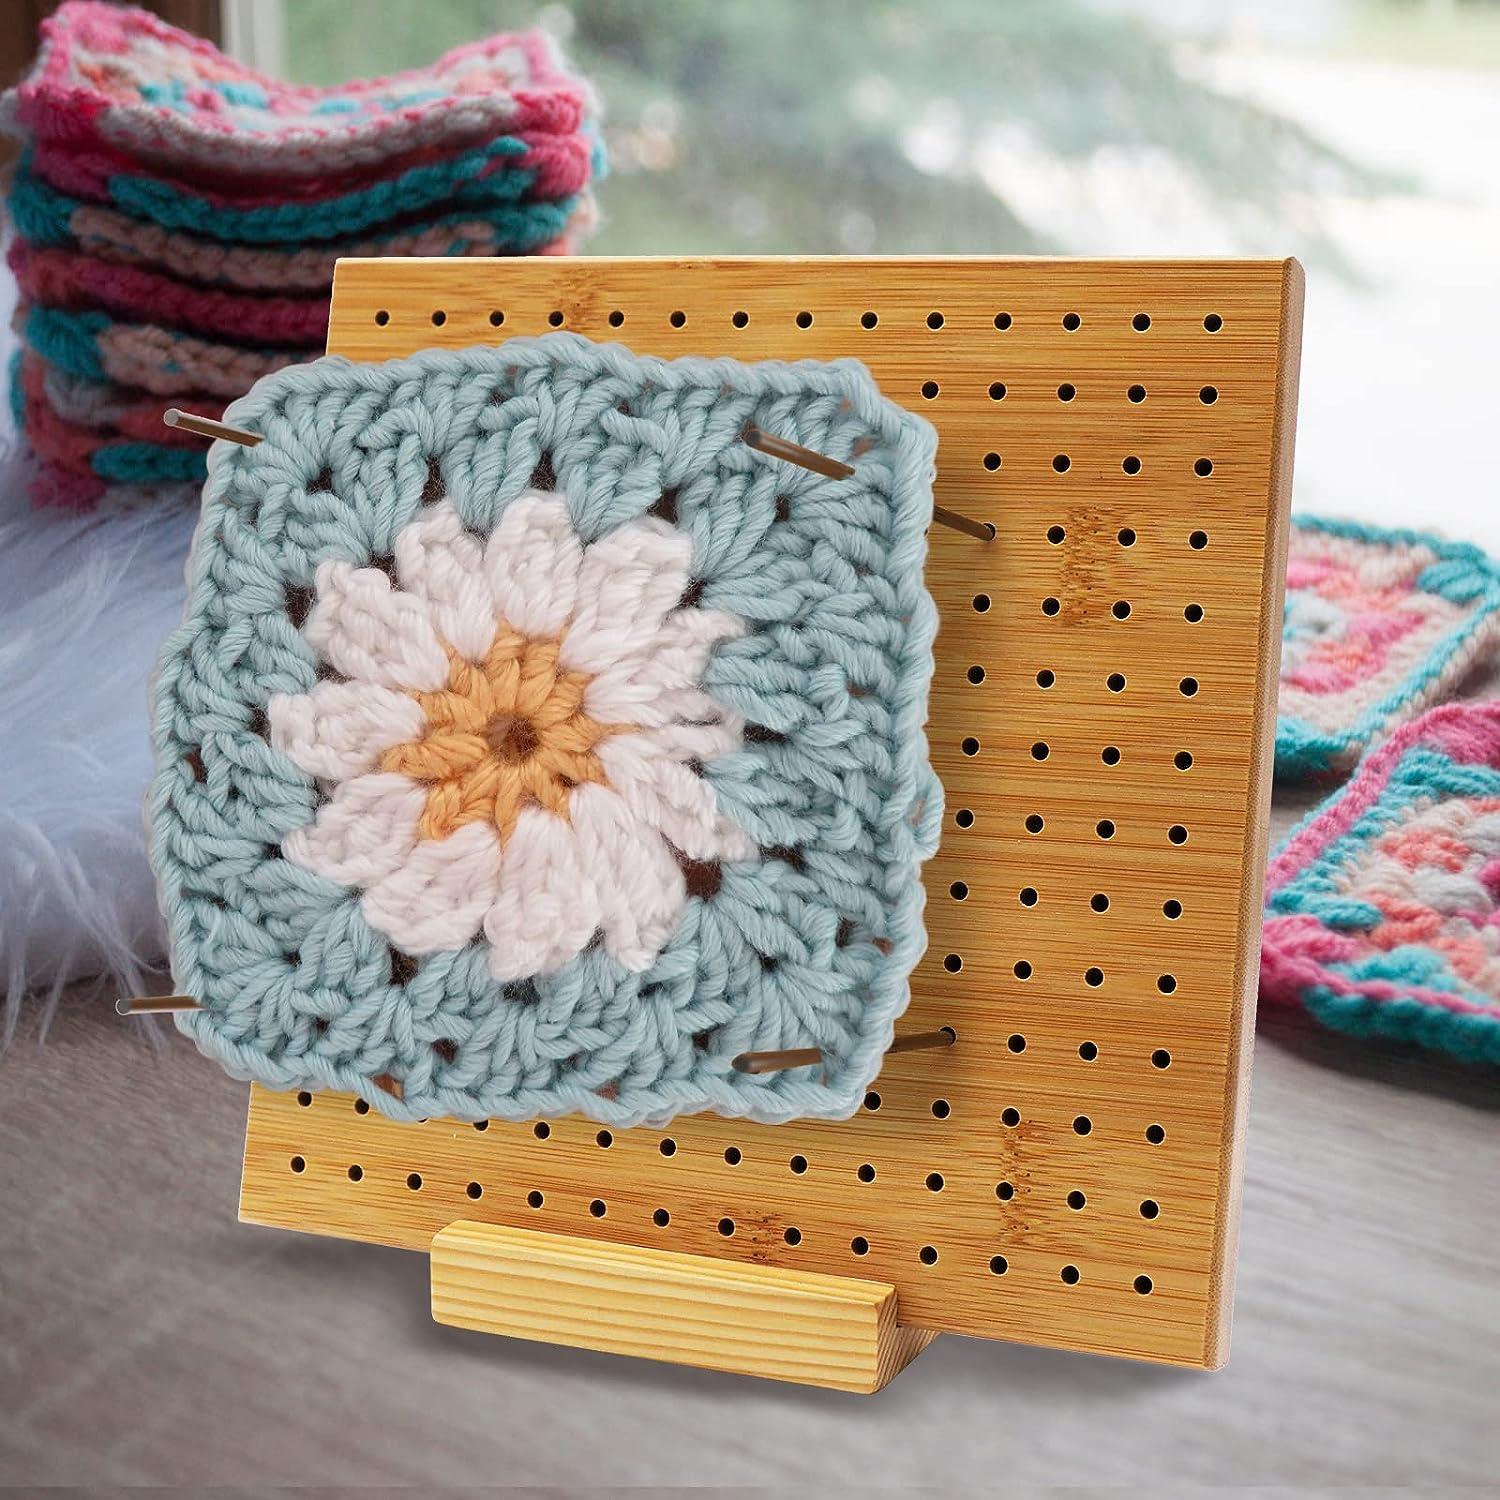 Crochet Blocking Board, 8 X 8 Inch Granny Square Blocking Board for Crochet  Projects, Wooden Crochet Blocking Board with 24 Stainless Steel Pegs